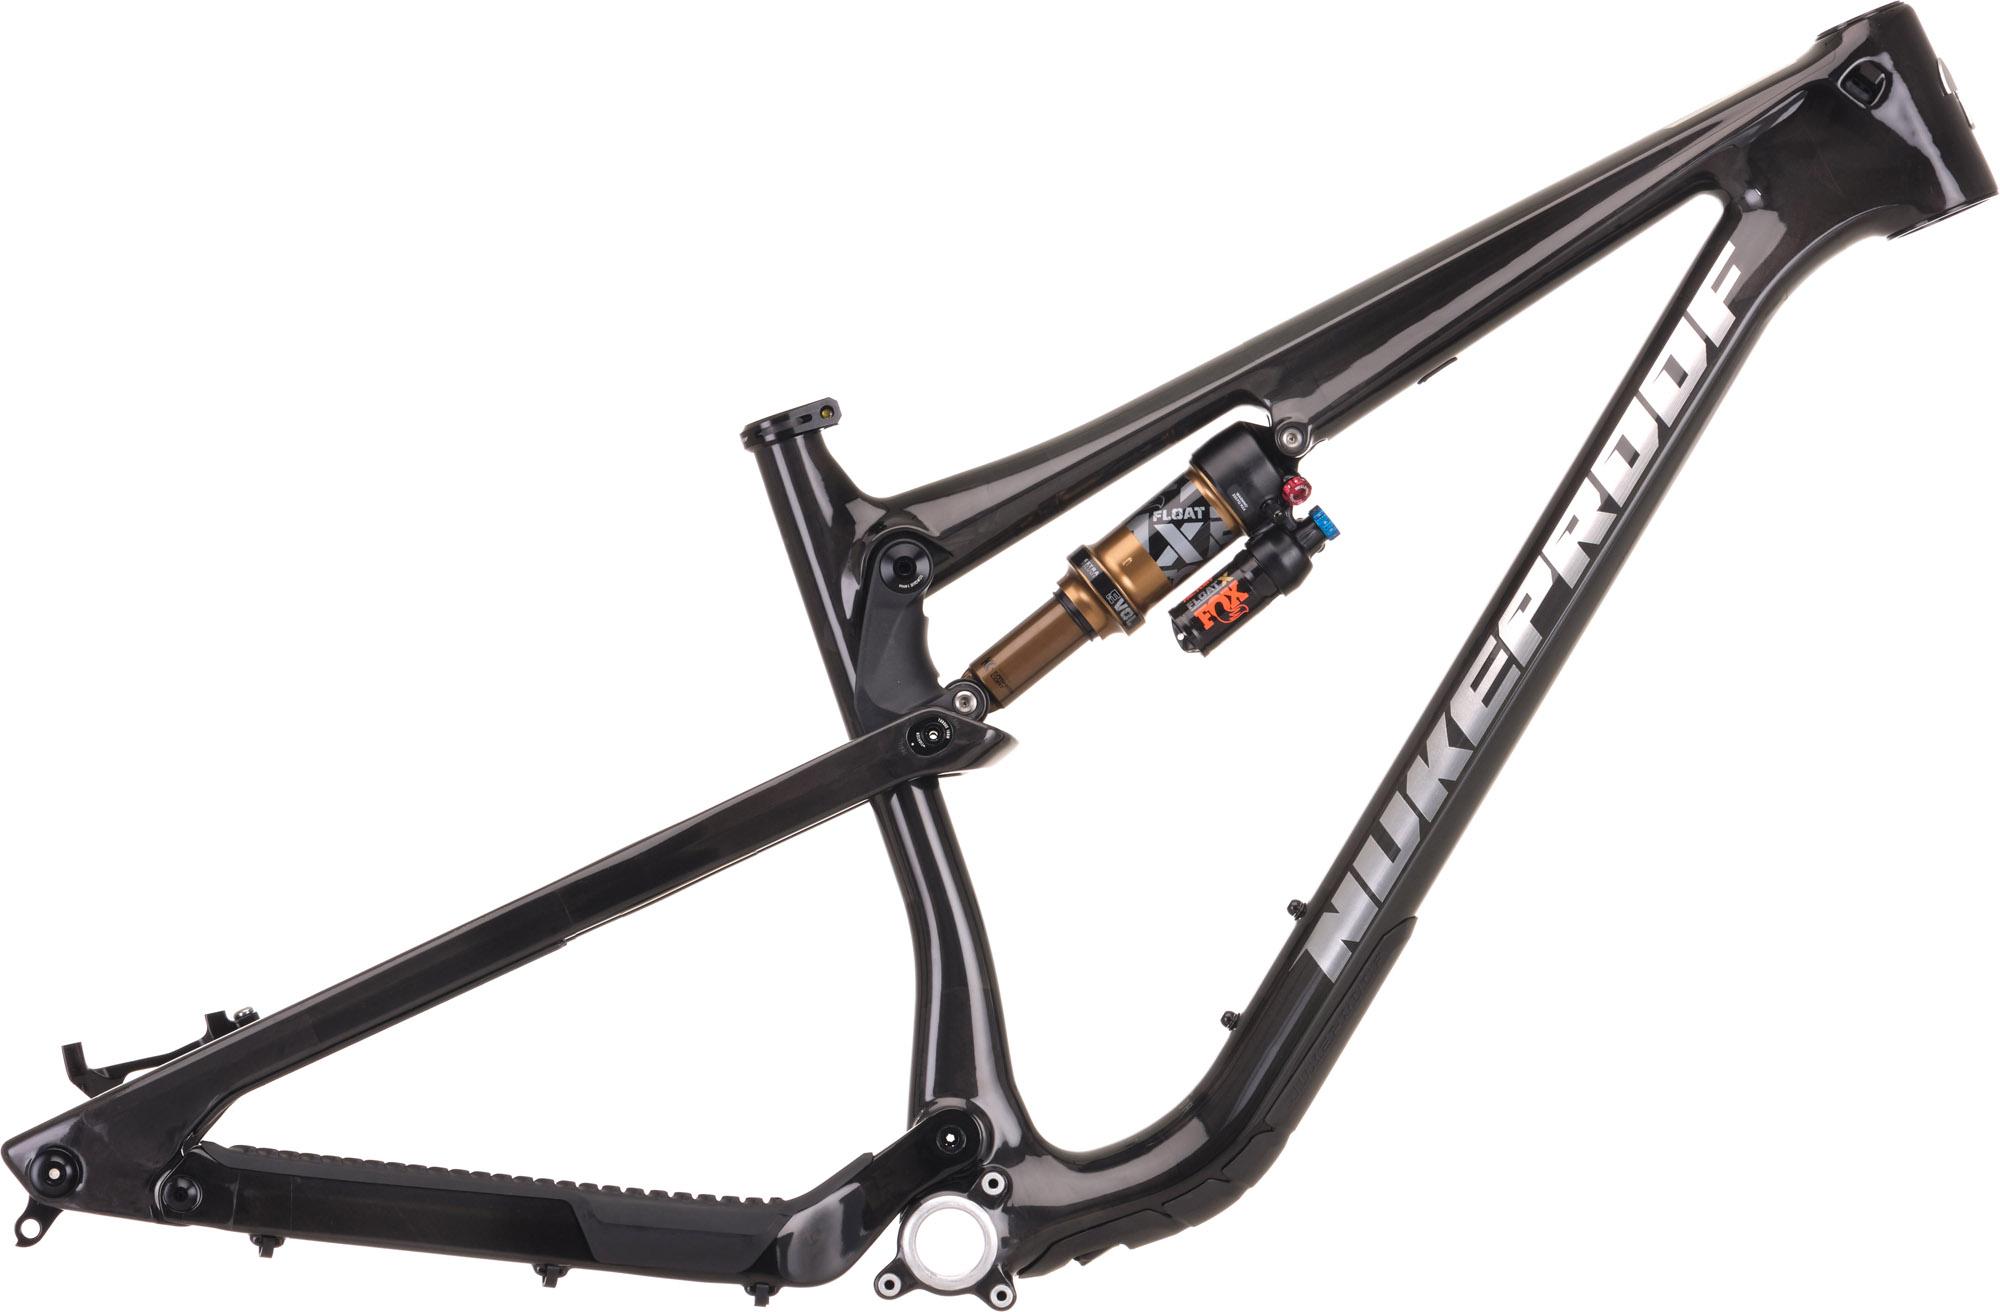 Nukeproof Reactor 290 Carbon Mountain Bike Frame - Raw Ud Carbon